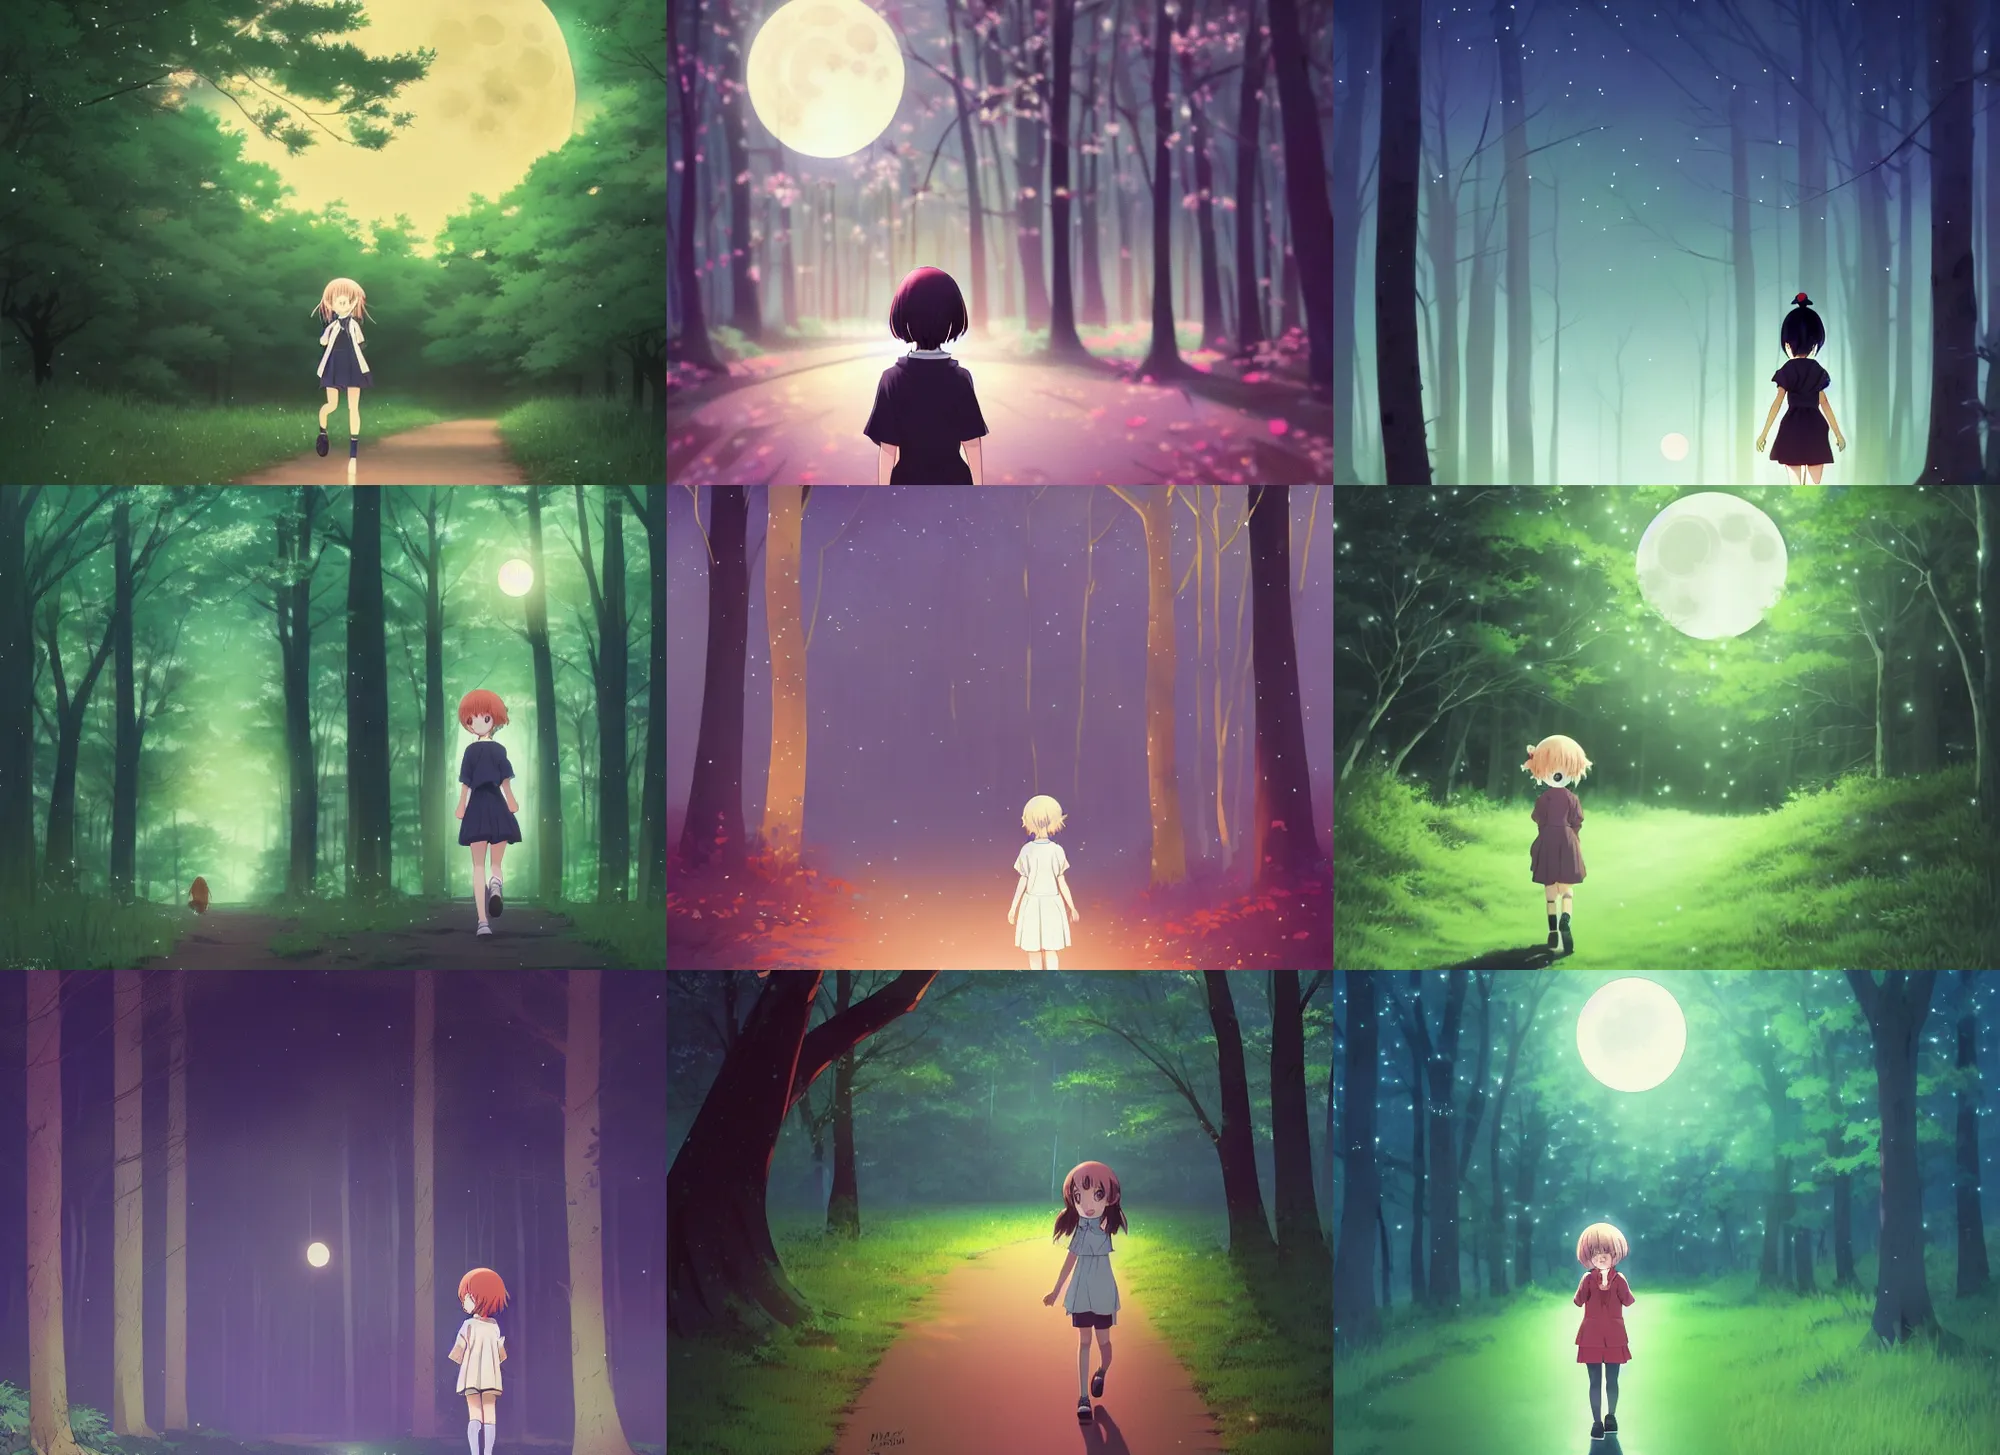 Prompt: anime visual, portrait of a curious young girl walking in a forest at night, moonlight, cute face by ilya kuvshinov, yoh yoshinari, dynamic pose, dynamic perspective, high contrast, cel shaded, rounded eyes, kyoani, natsume yuujinchou, smooth facial features, makoto shinkai